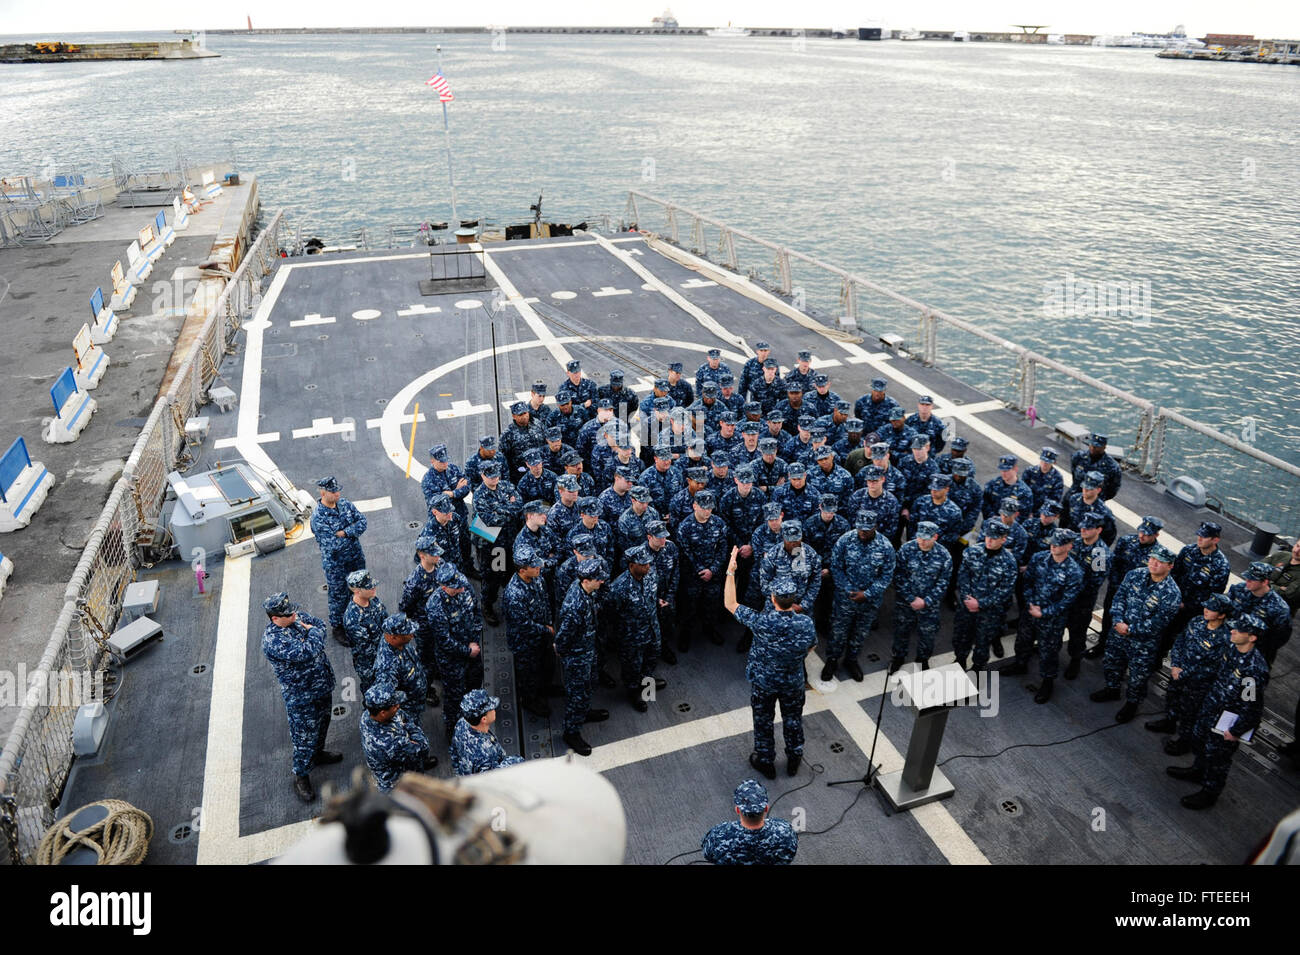 140129-N-XZ912-002 NAPLES, Italy (Jan. 24, 2014) Vice Adm. Phil Davidson, commander, U.S. 6th Fleet, addresses the crew of the Oliver Hazard Perry-class frigate USS Taylor (FFG 50) during an all-hands call. During the visit, Davidson also toured the ship and met with the ship's senior leadership. (U.S. Navy photo by Mass Communication Specialist 1st Class Christopher B. Stoltz/Released) Join the conversation on Twitter ( https://twitter.com/naveur navaf )  follow us on Facebook ( https://www.facebook.com/USNavalForcesEuropeAfrica )  and while you're at it check us out on Google+ ( https://plus Stock Photo